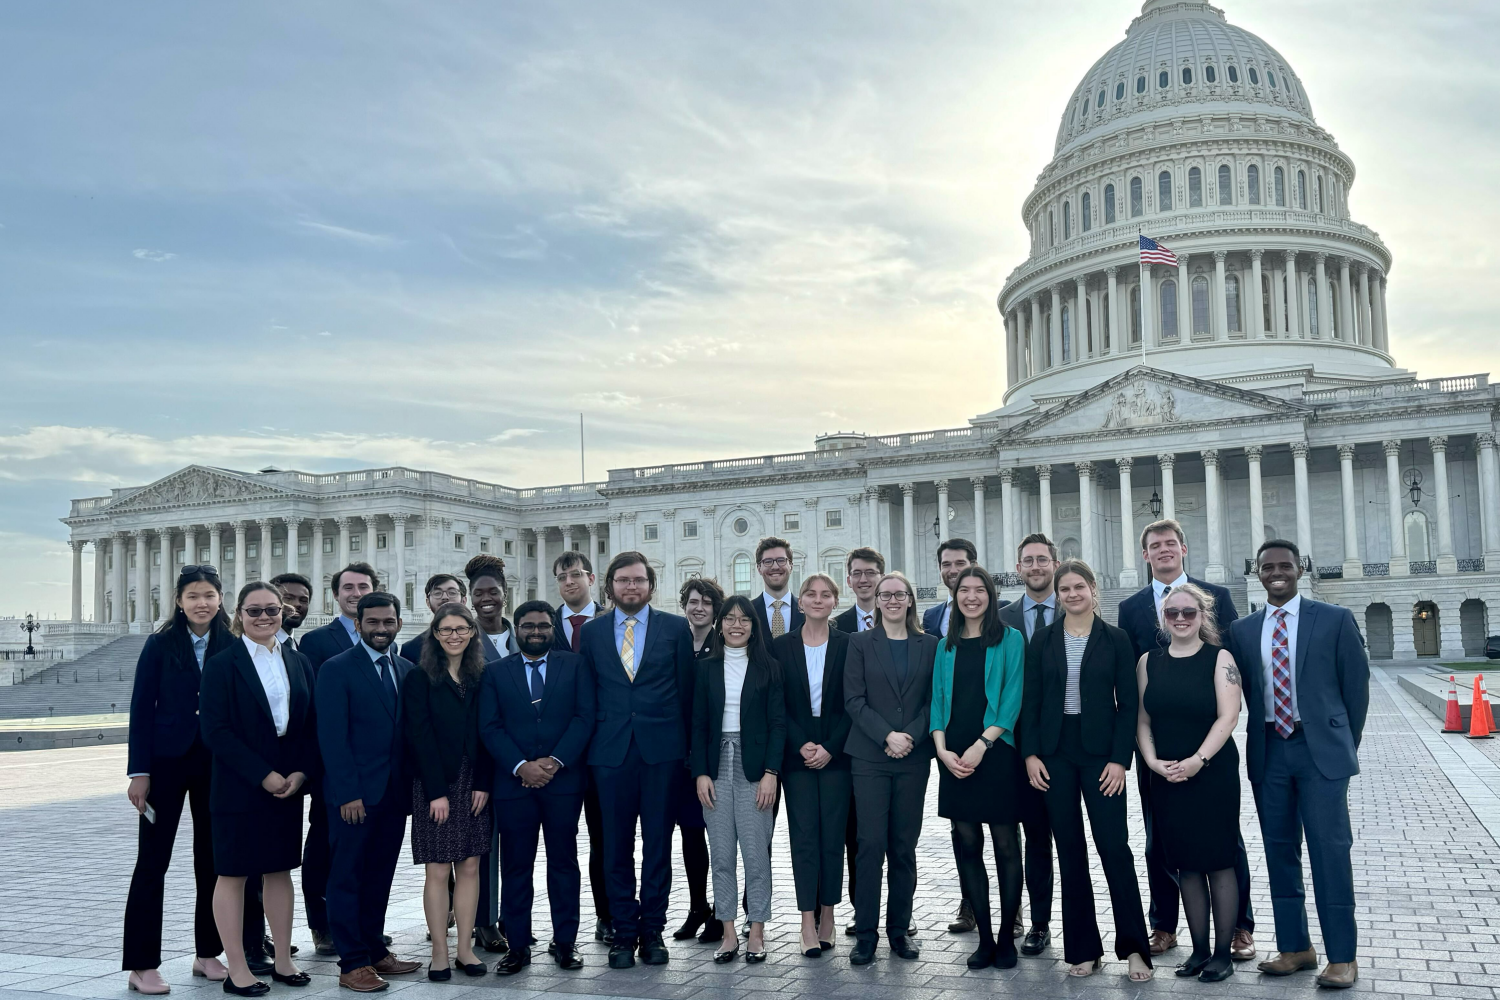 Congressional Visit Days participants pose in front of the U.S. Capitol.